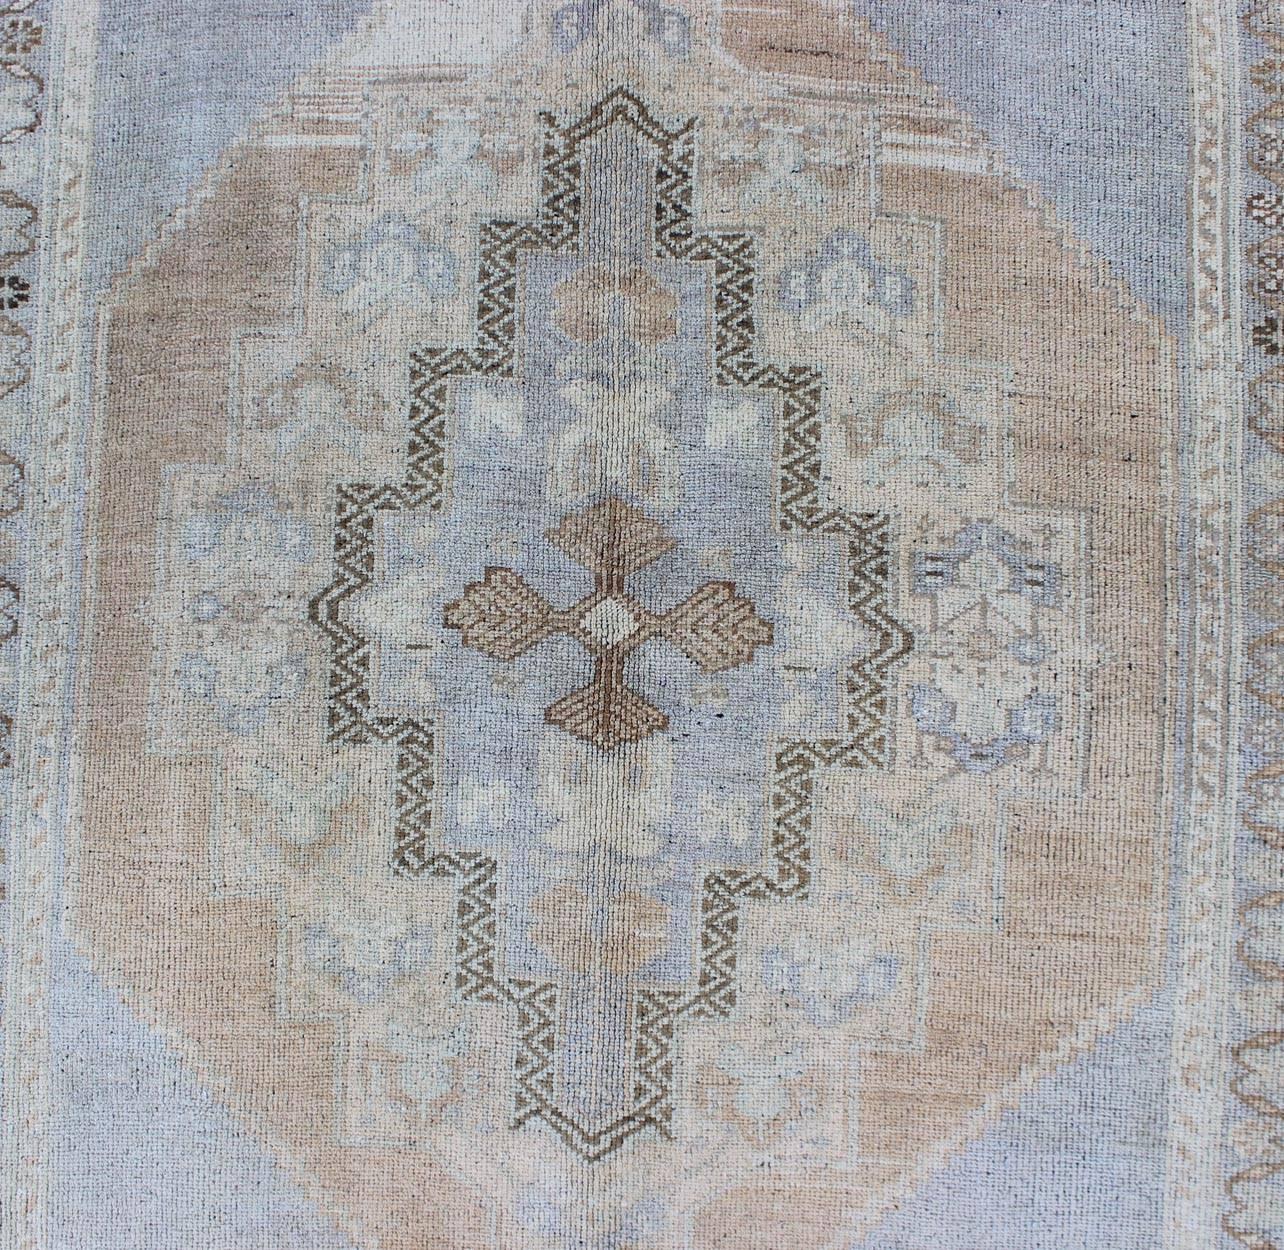 Periwinkle Blue and Tan Vintage Turkish Oushak Rug with Layered Medallion In Excellent Condition For Sale In Atlanta, GA